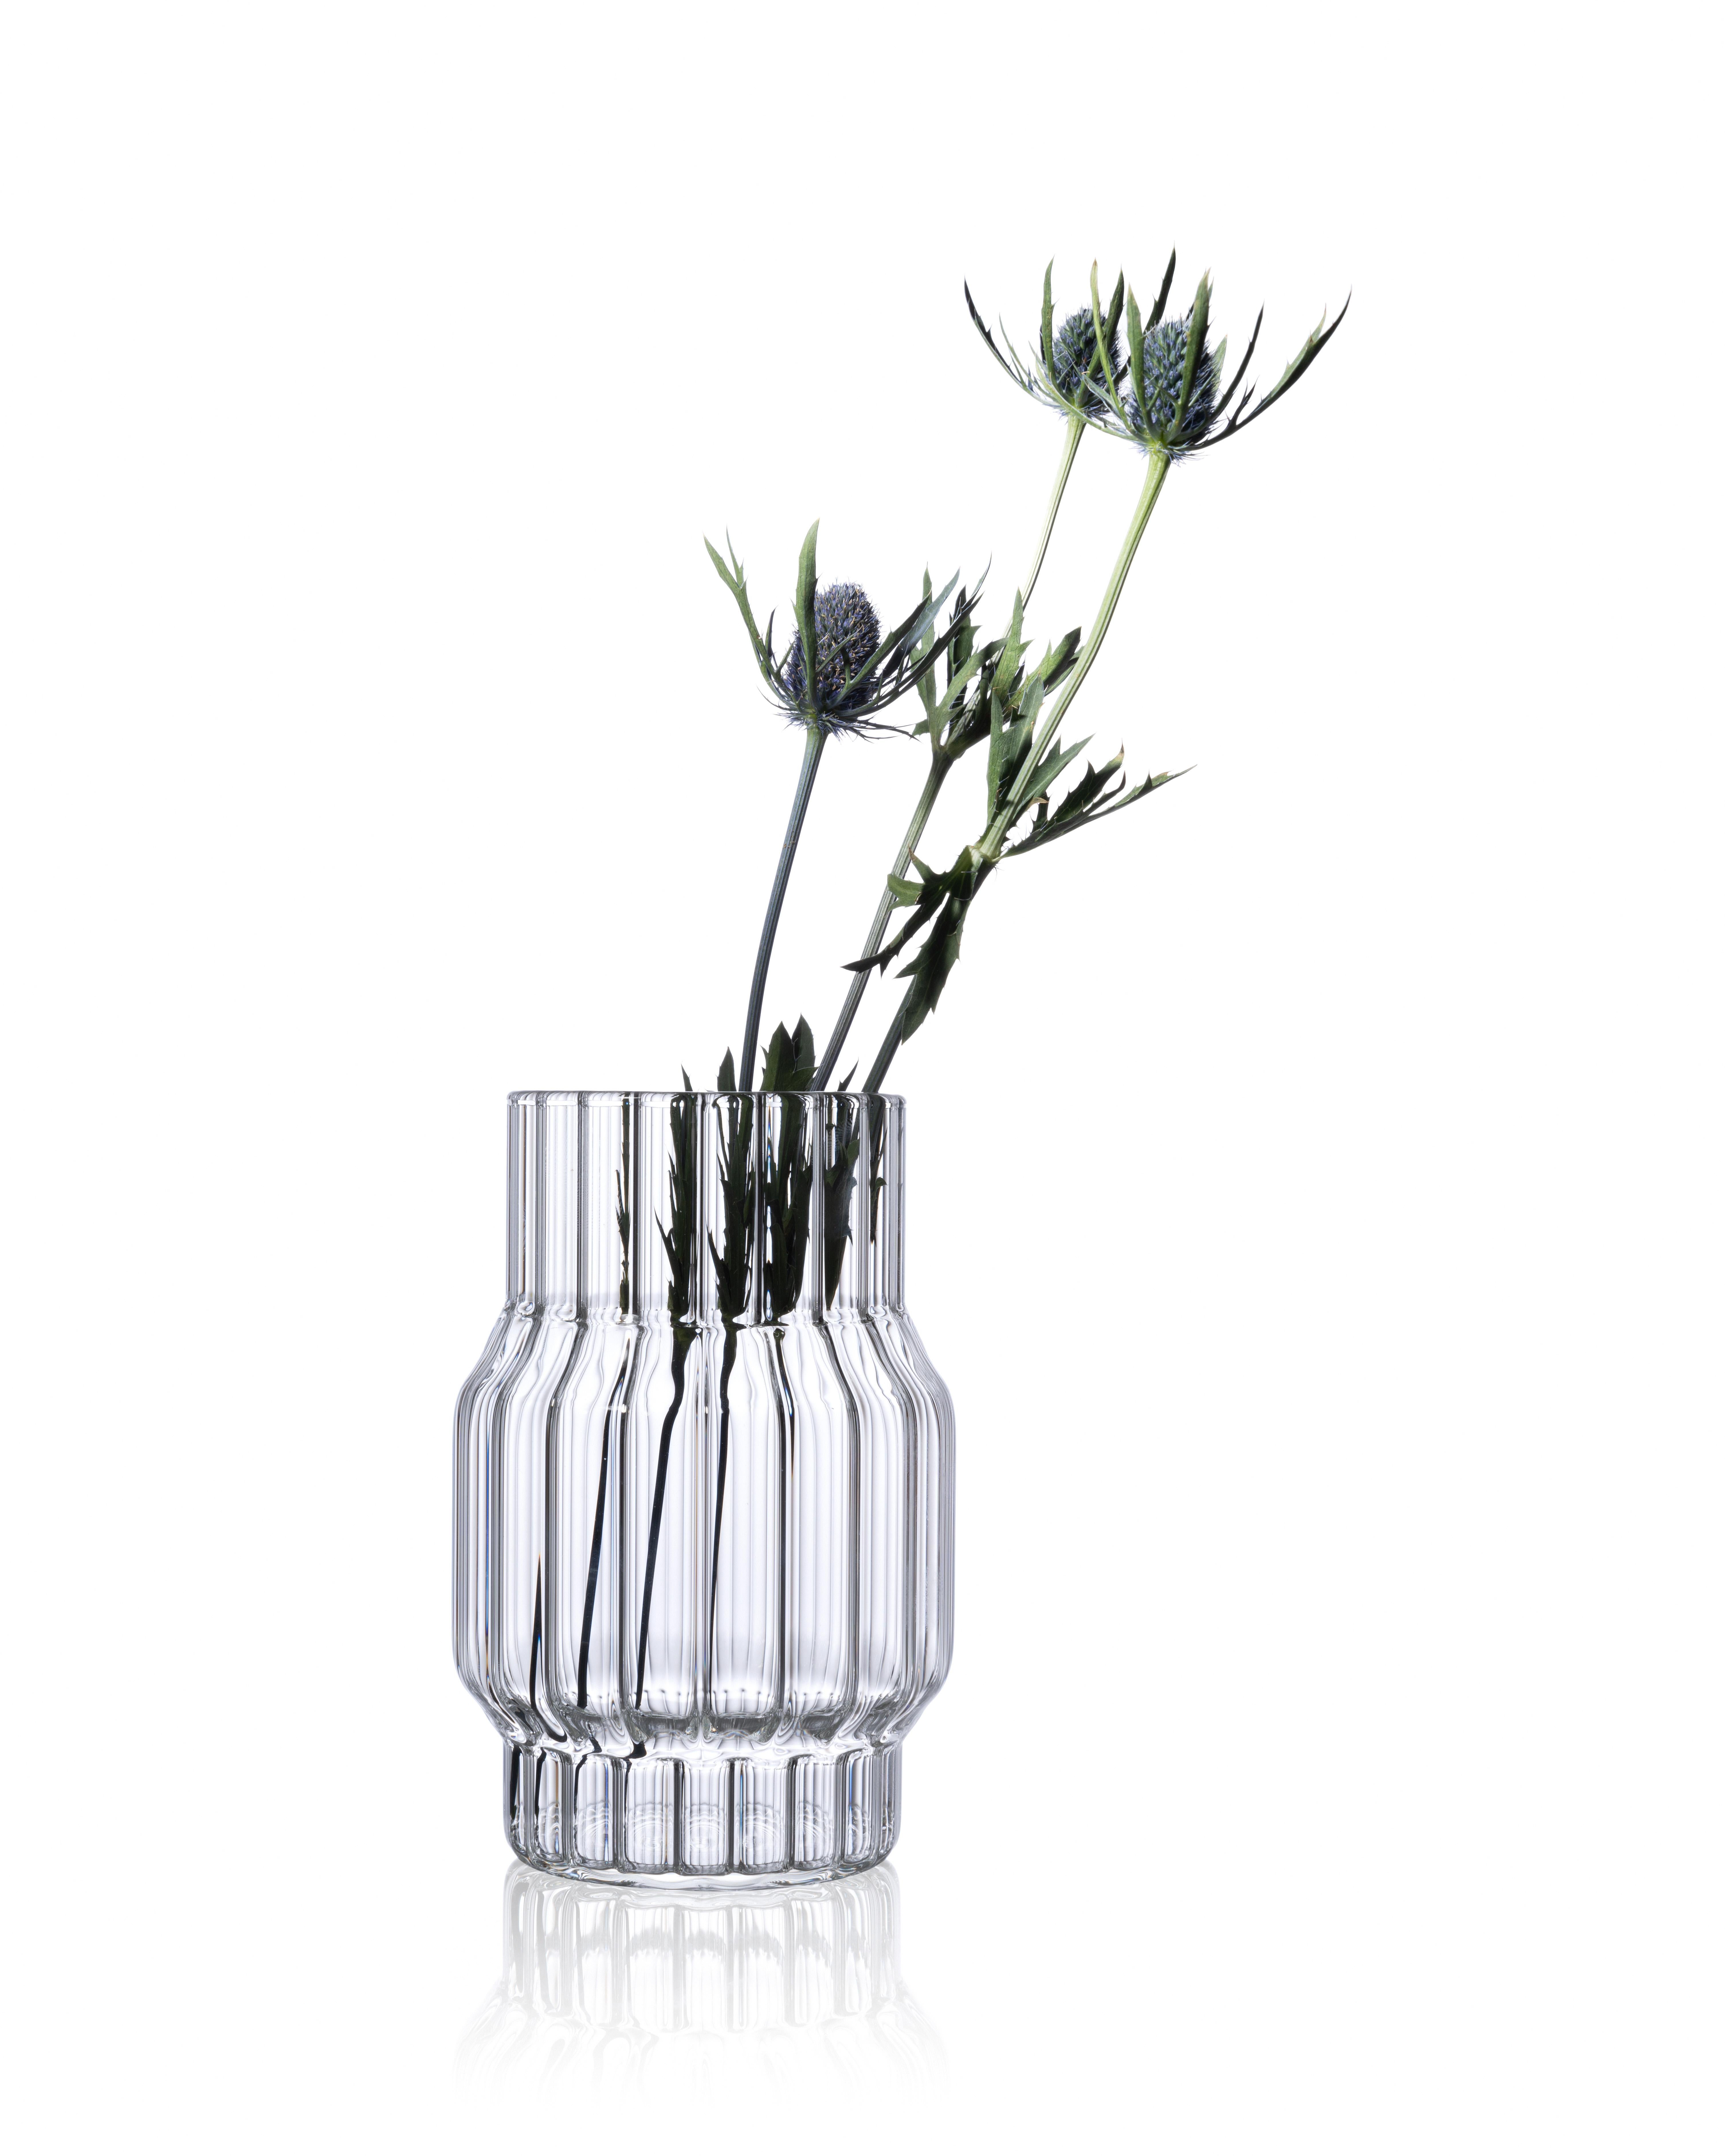 Modern Contemporary Glass Fluted Albany Vase Set, 3 Vases, in Stock in EU